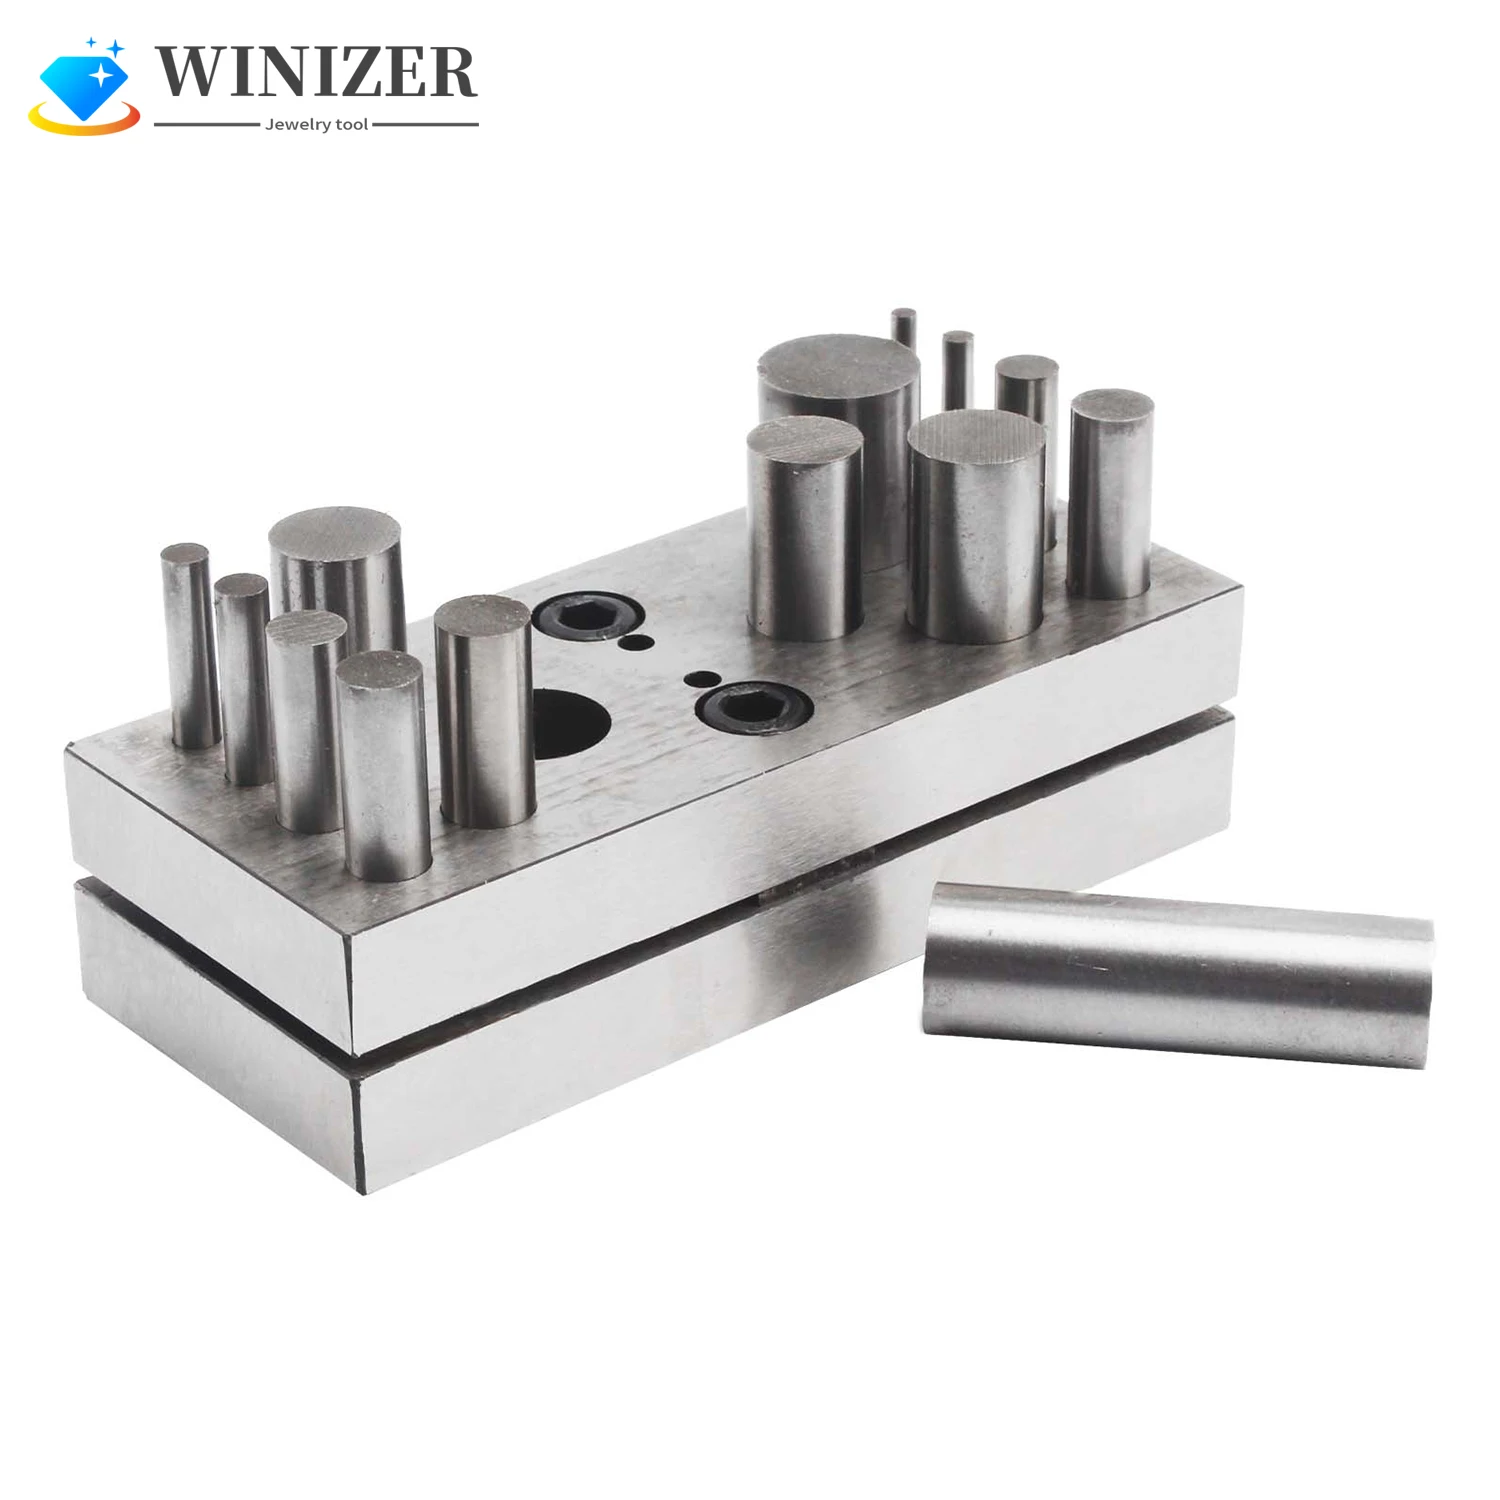 Disc Cutter 14 Round Punches Set Jewelry Making Metal Cutting Forming Pendant Charm Coin Punch Tool